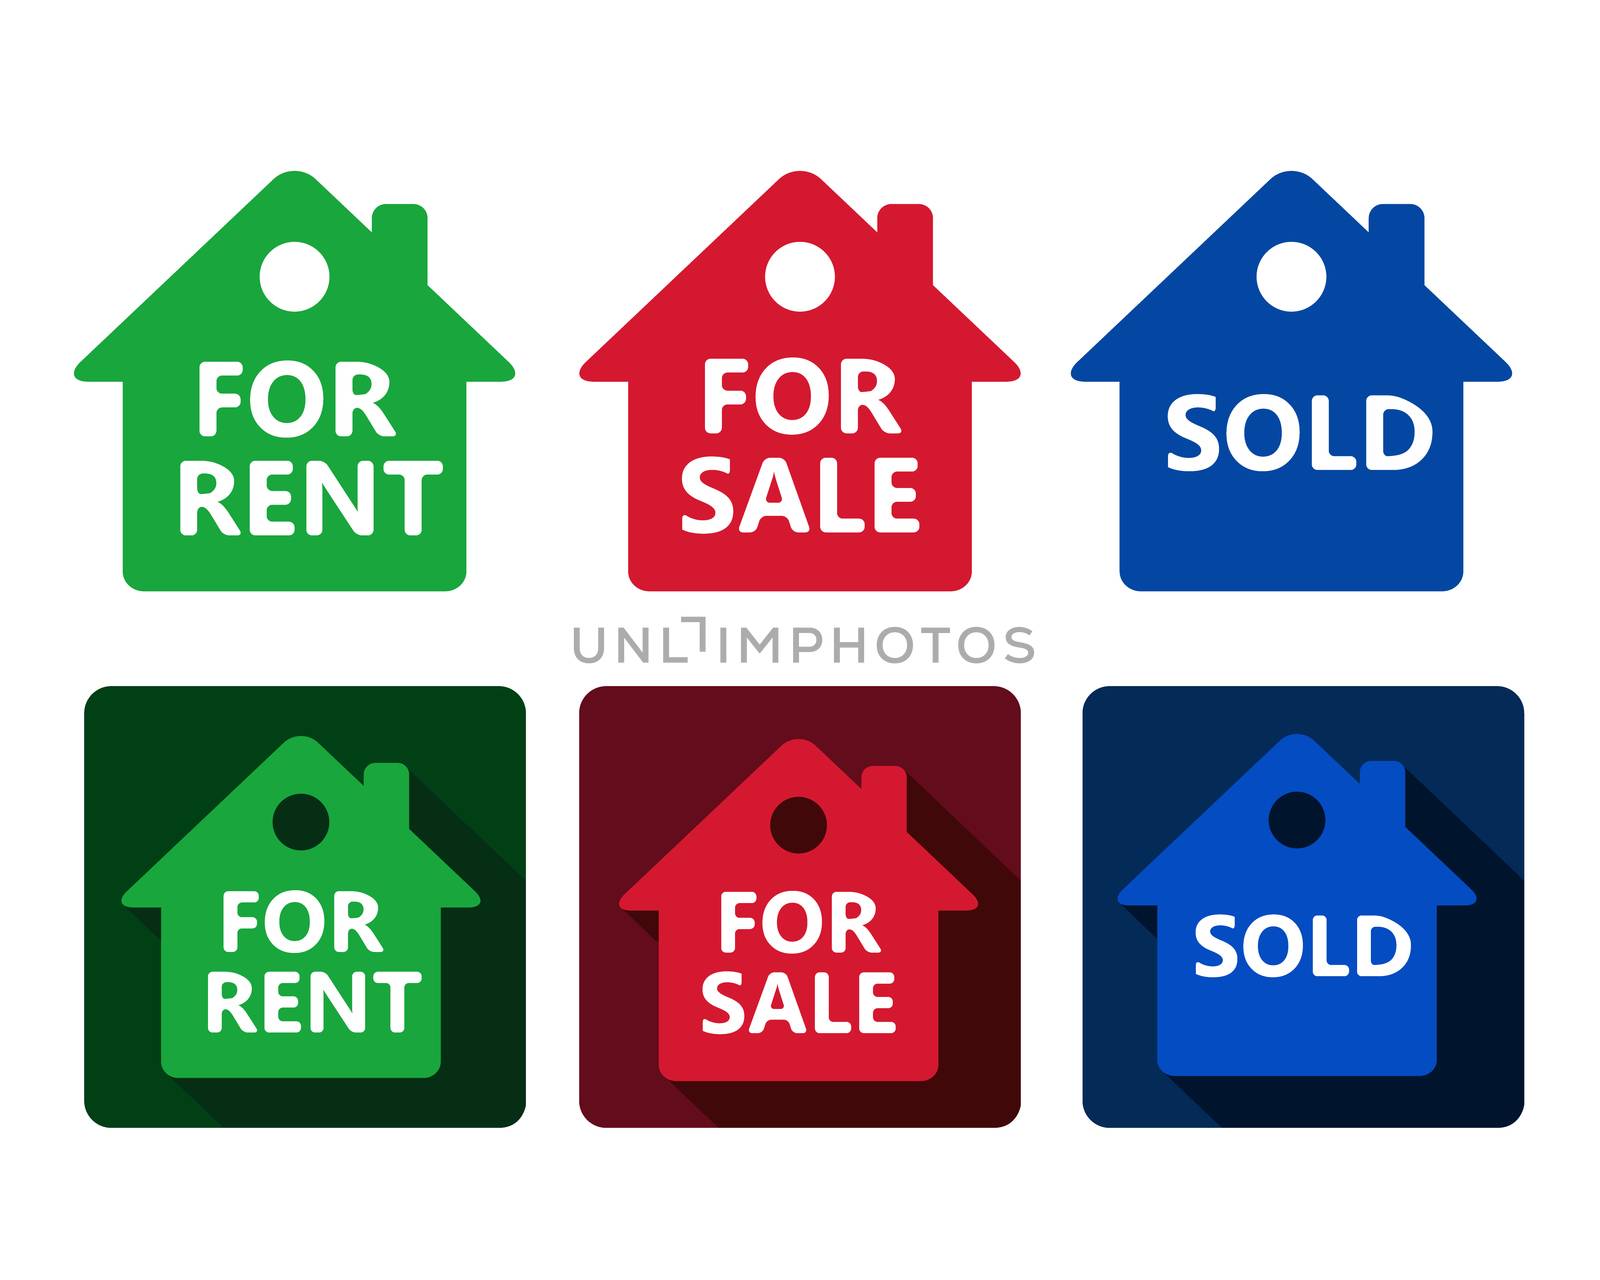 set of real estate house icon red green and blue houses with text for rent sold for sale in simple flat design on rounded square with shadow and isolated on white background